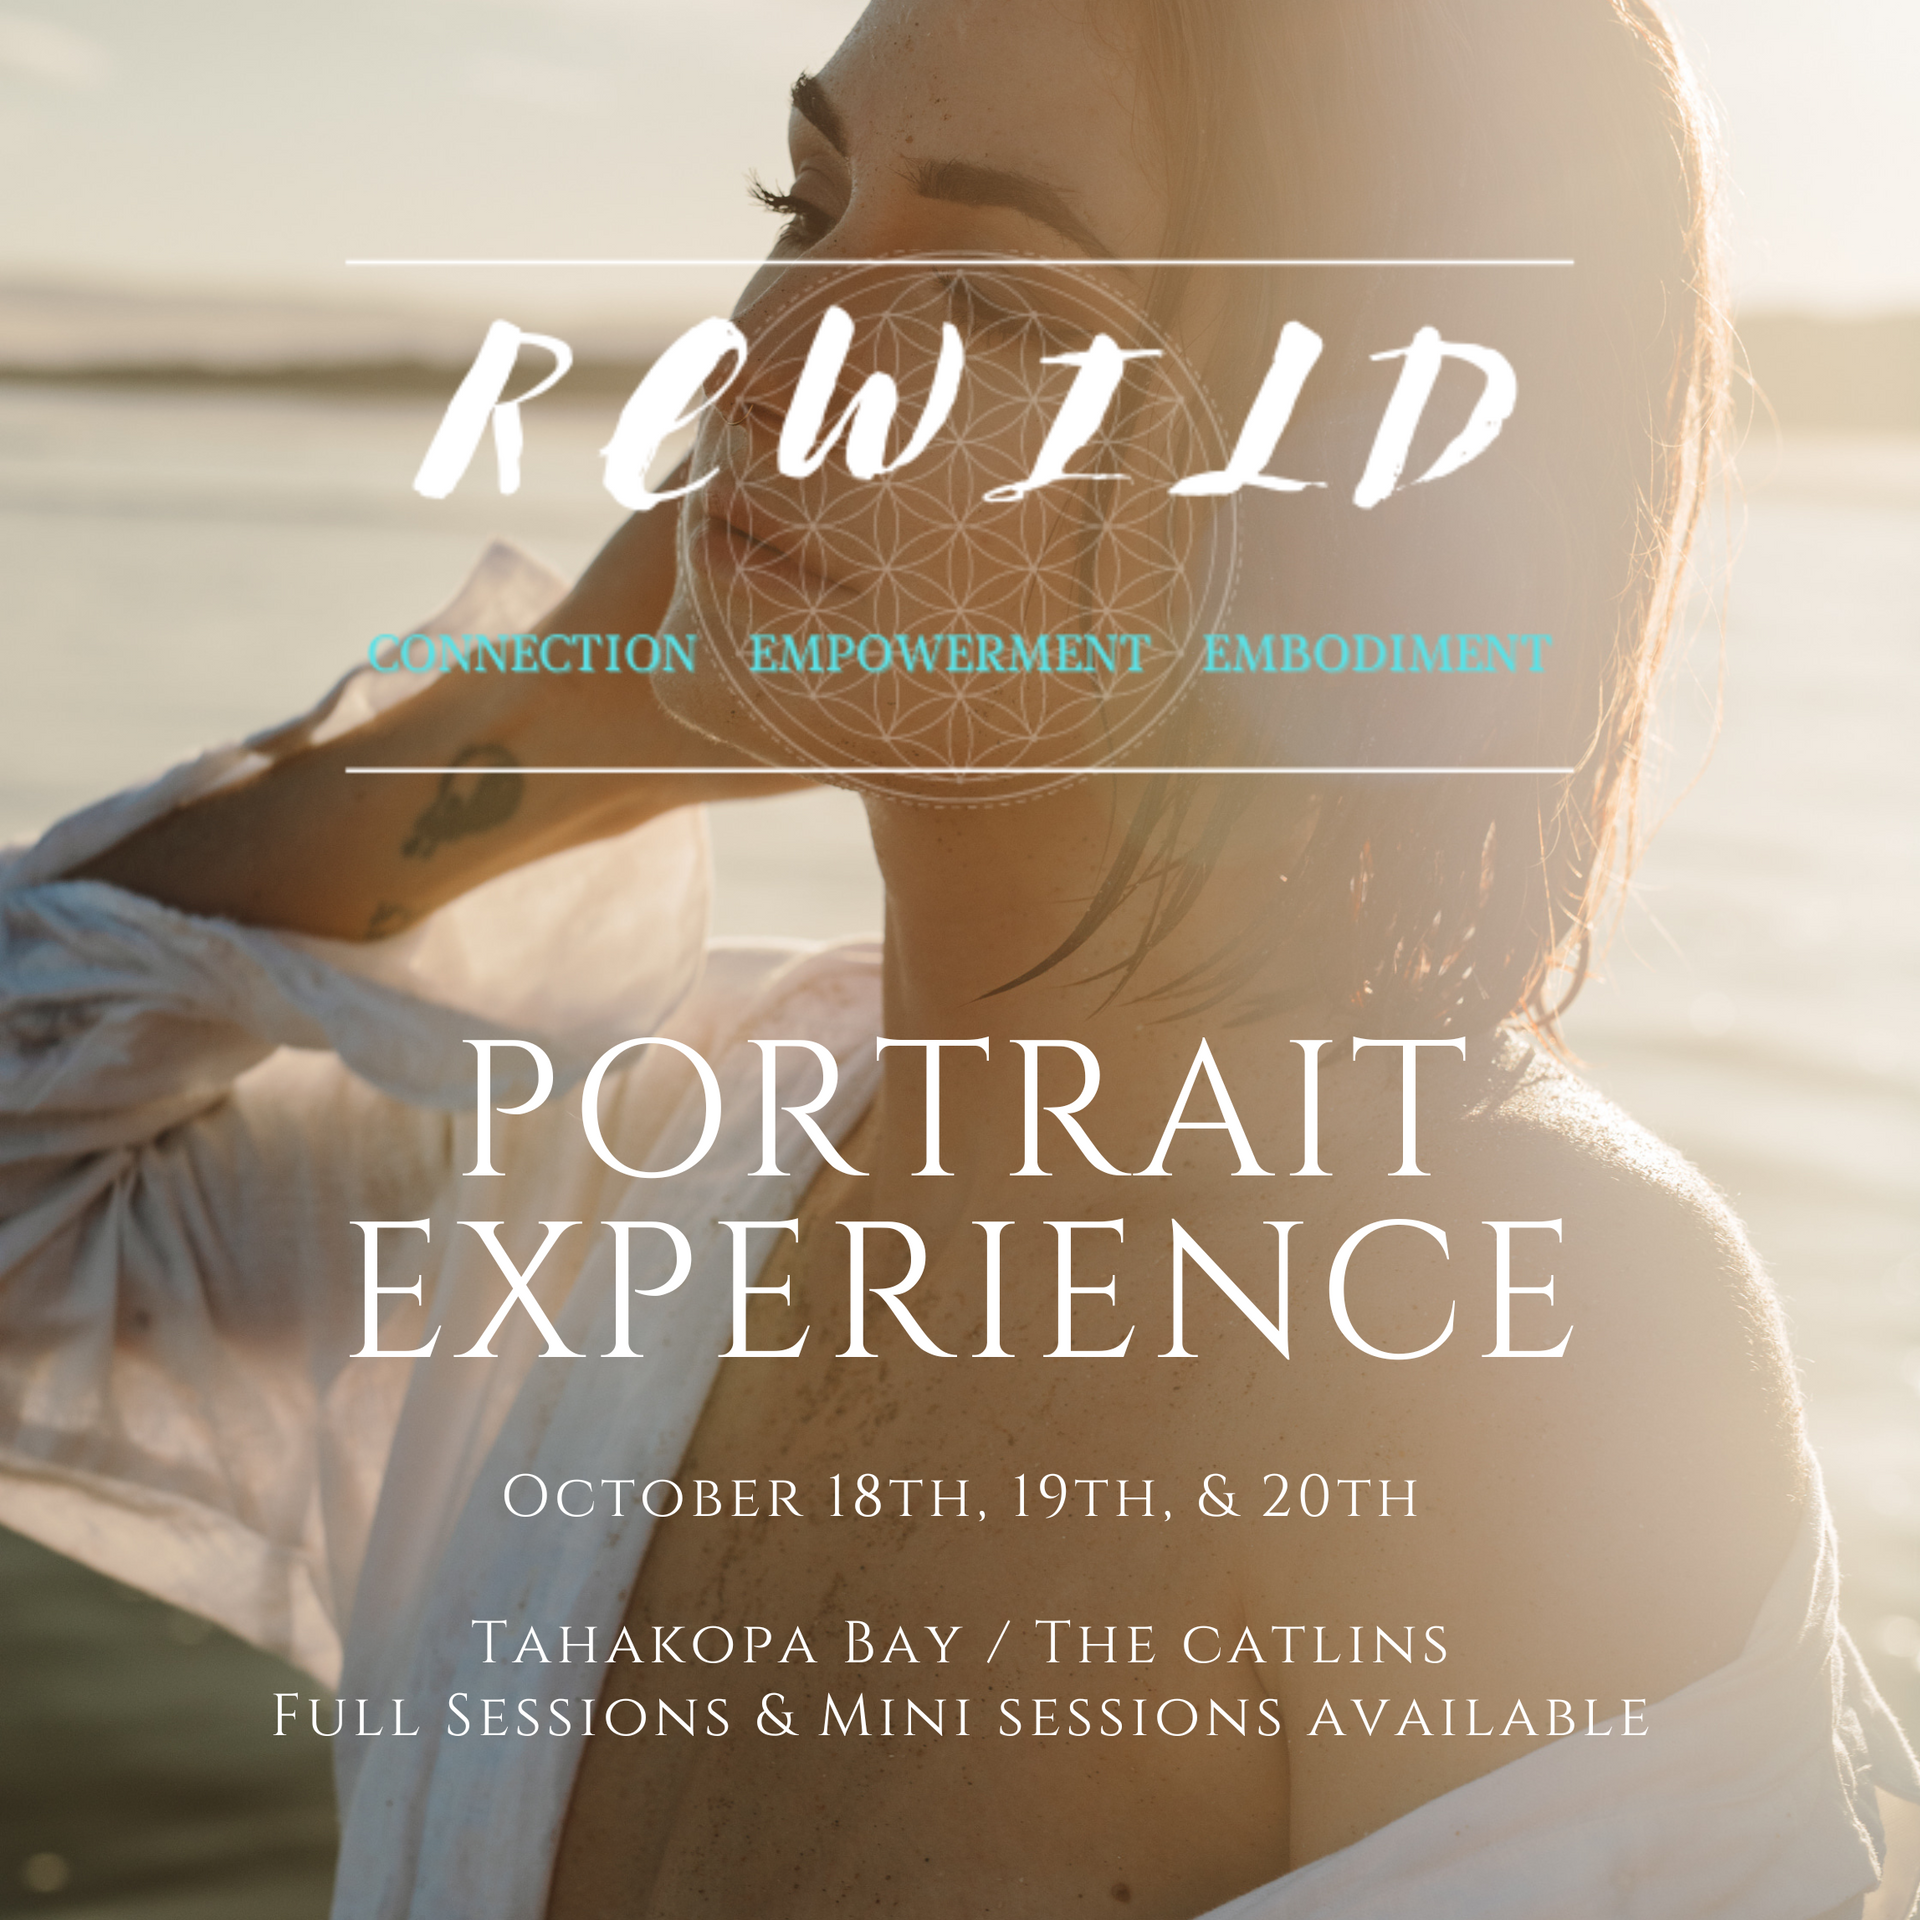 Rewild Portrait Experience: Finding Your Wild (The Catlins)